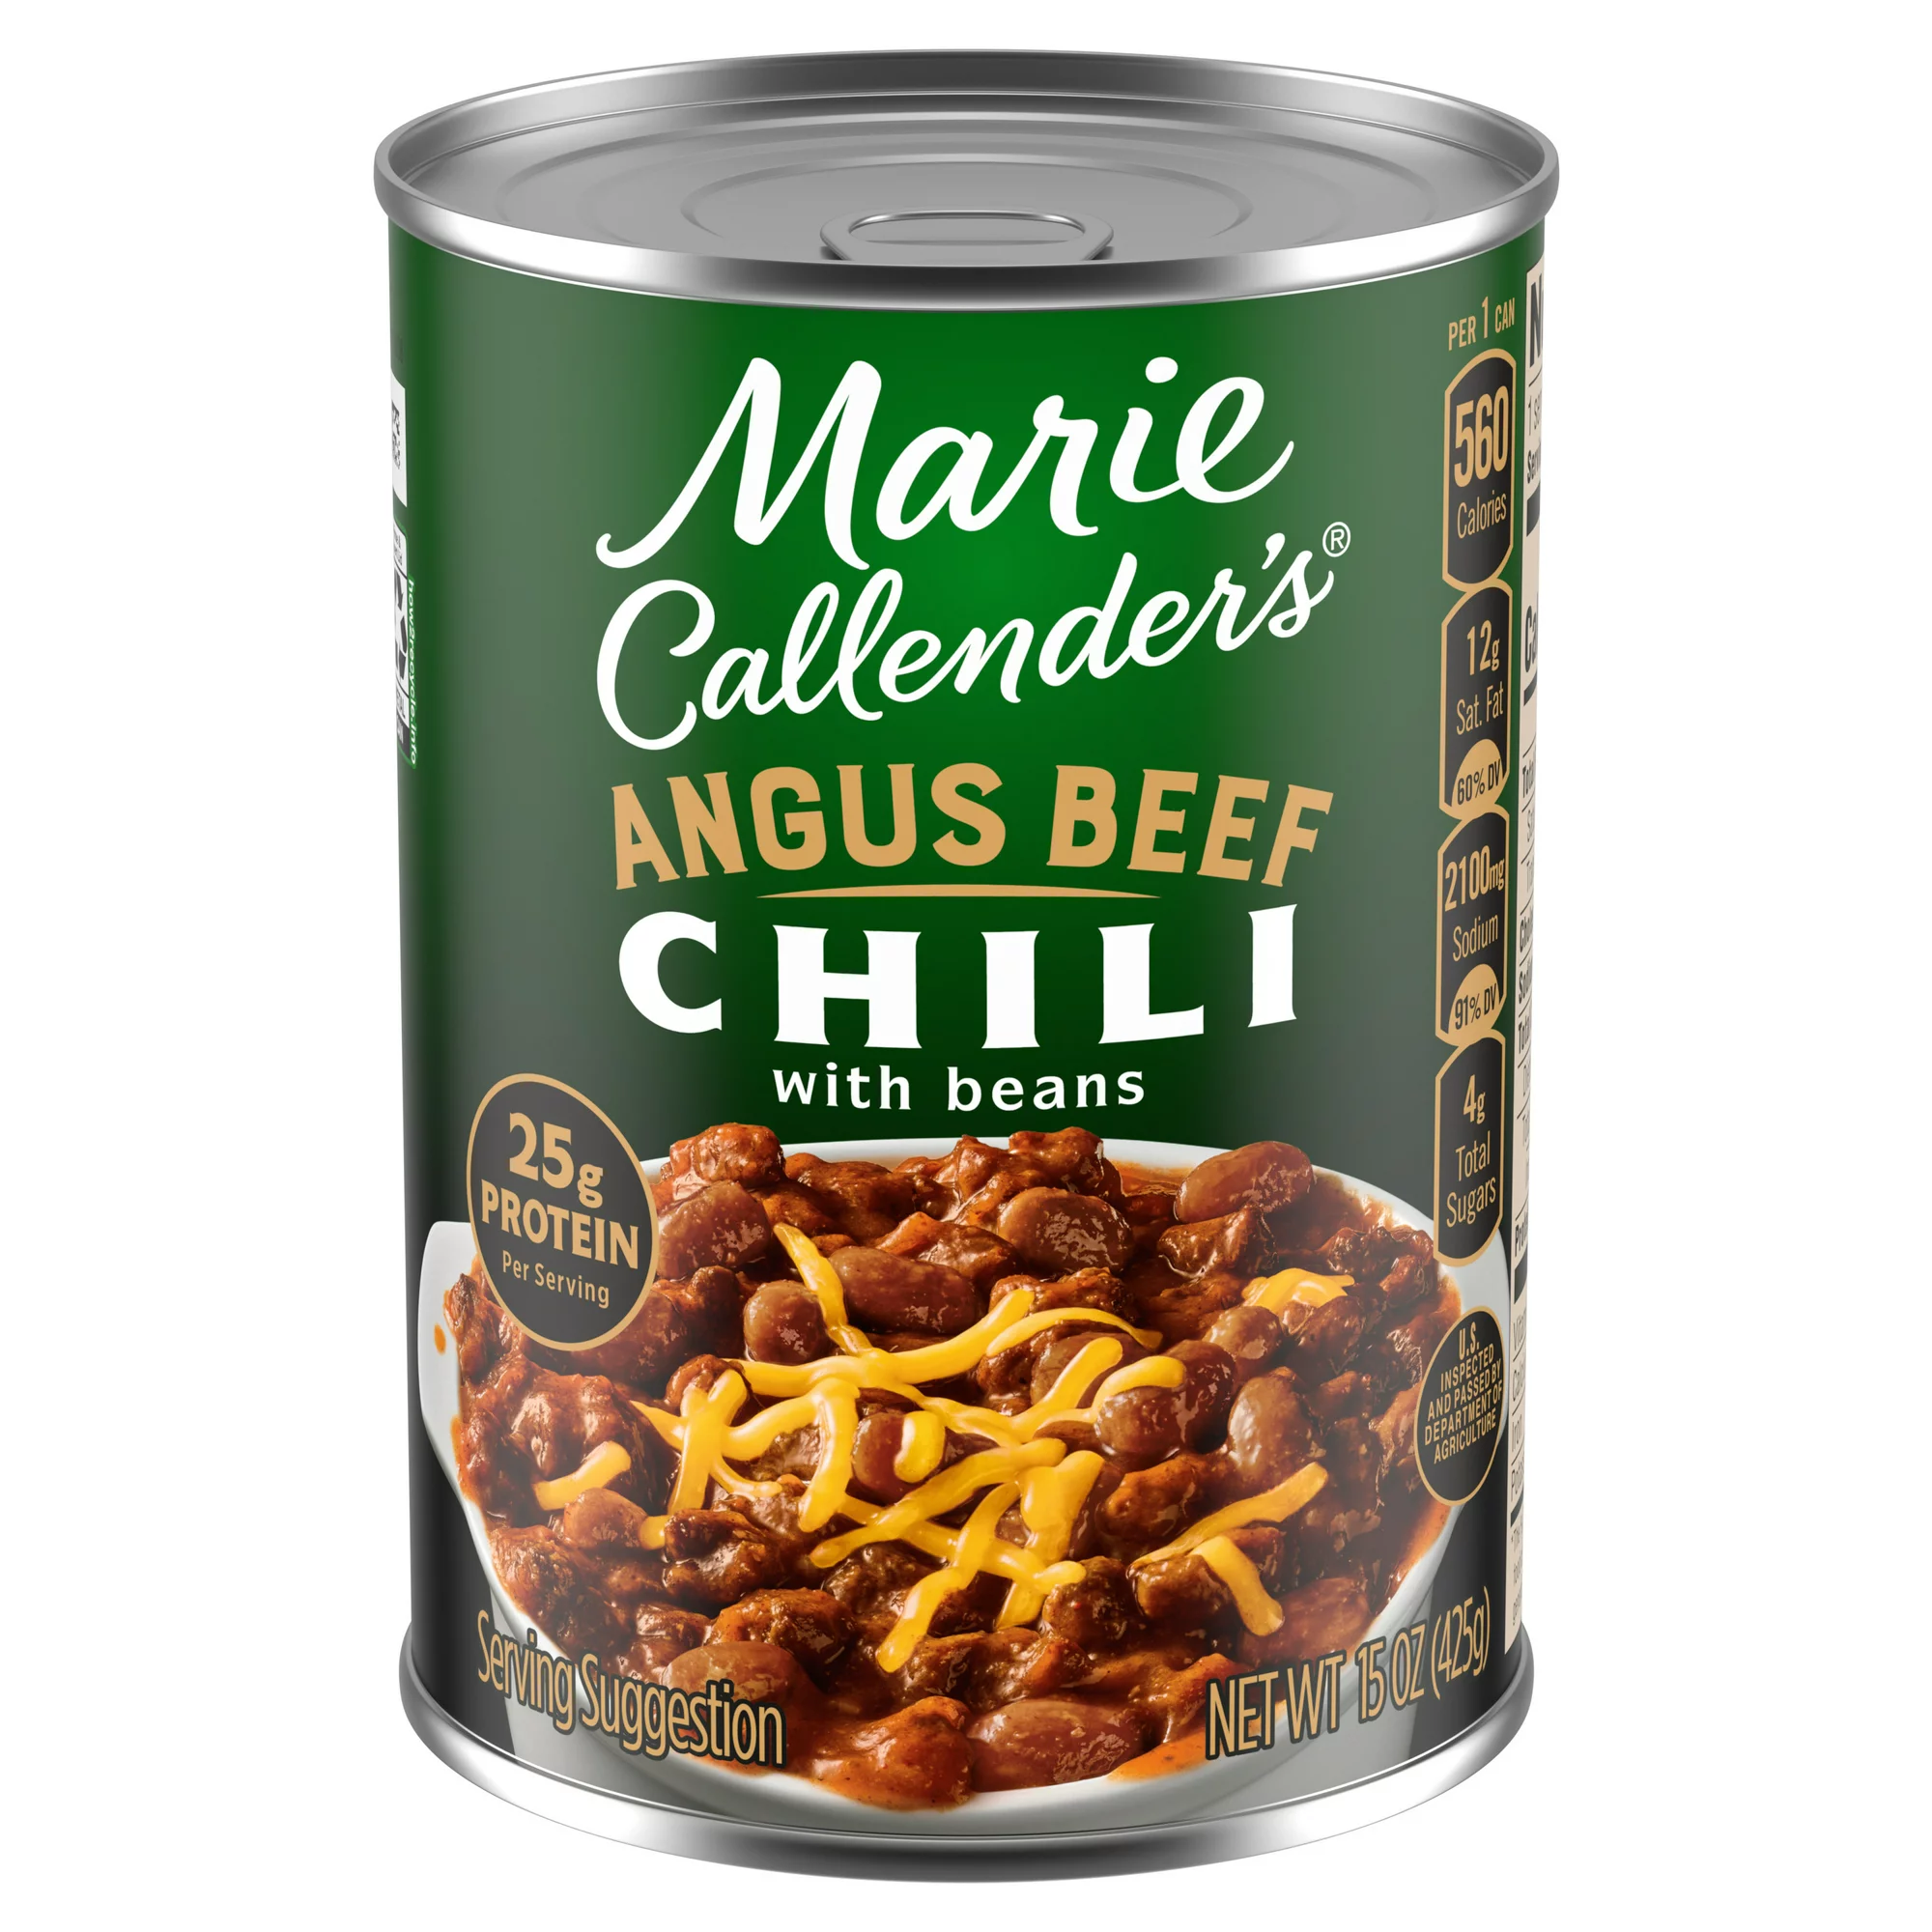 Marie Callender&#39;s Angus Beef Chili Canned Meal 15 oz, Case Of 8 &amp; Recipes - $17.95